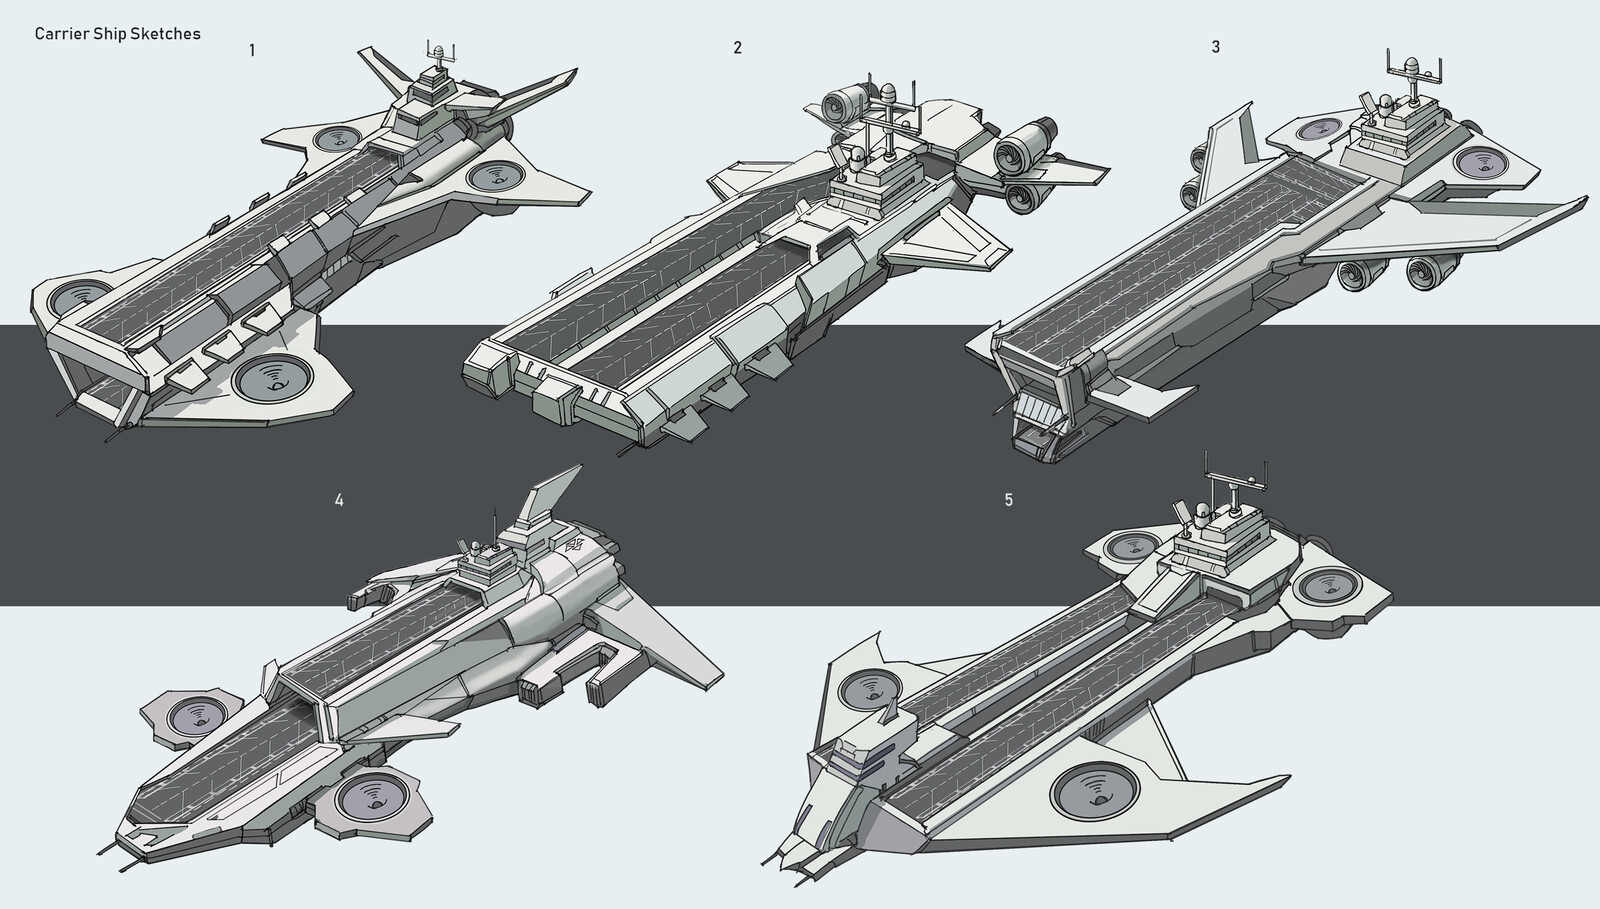 Flying Carrier Sketches